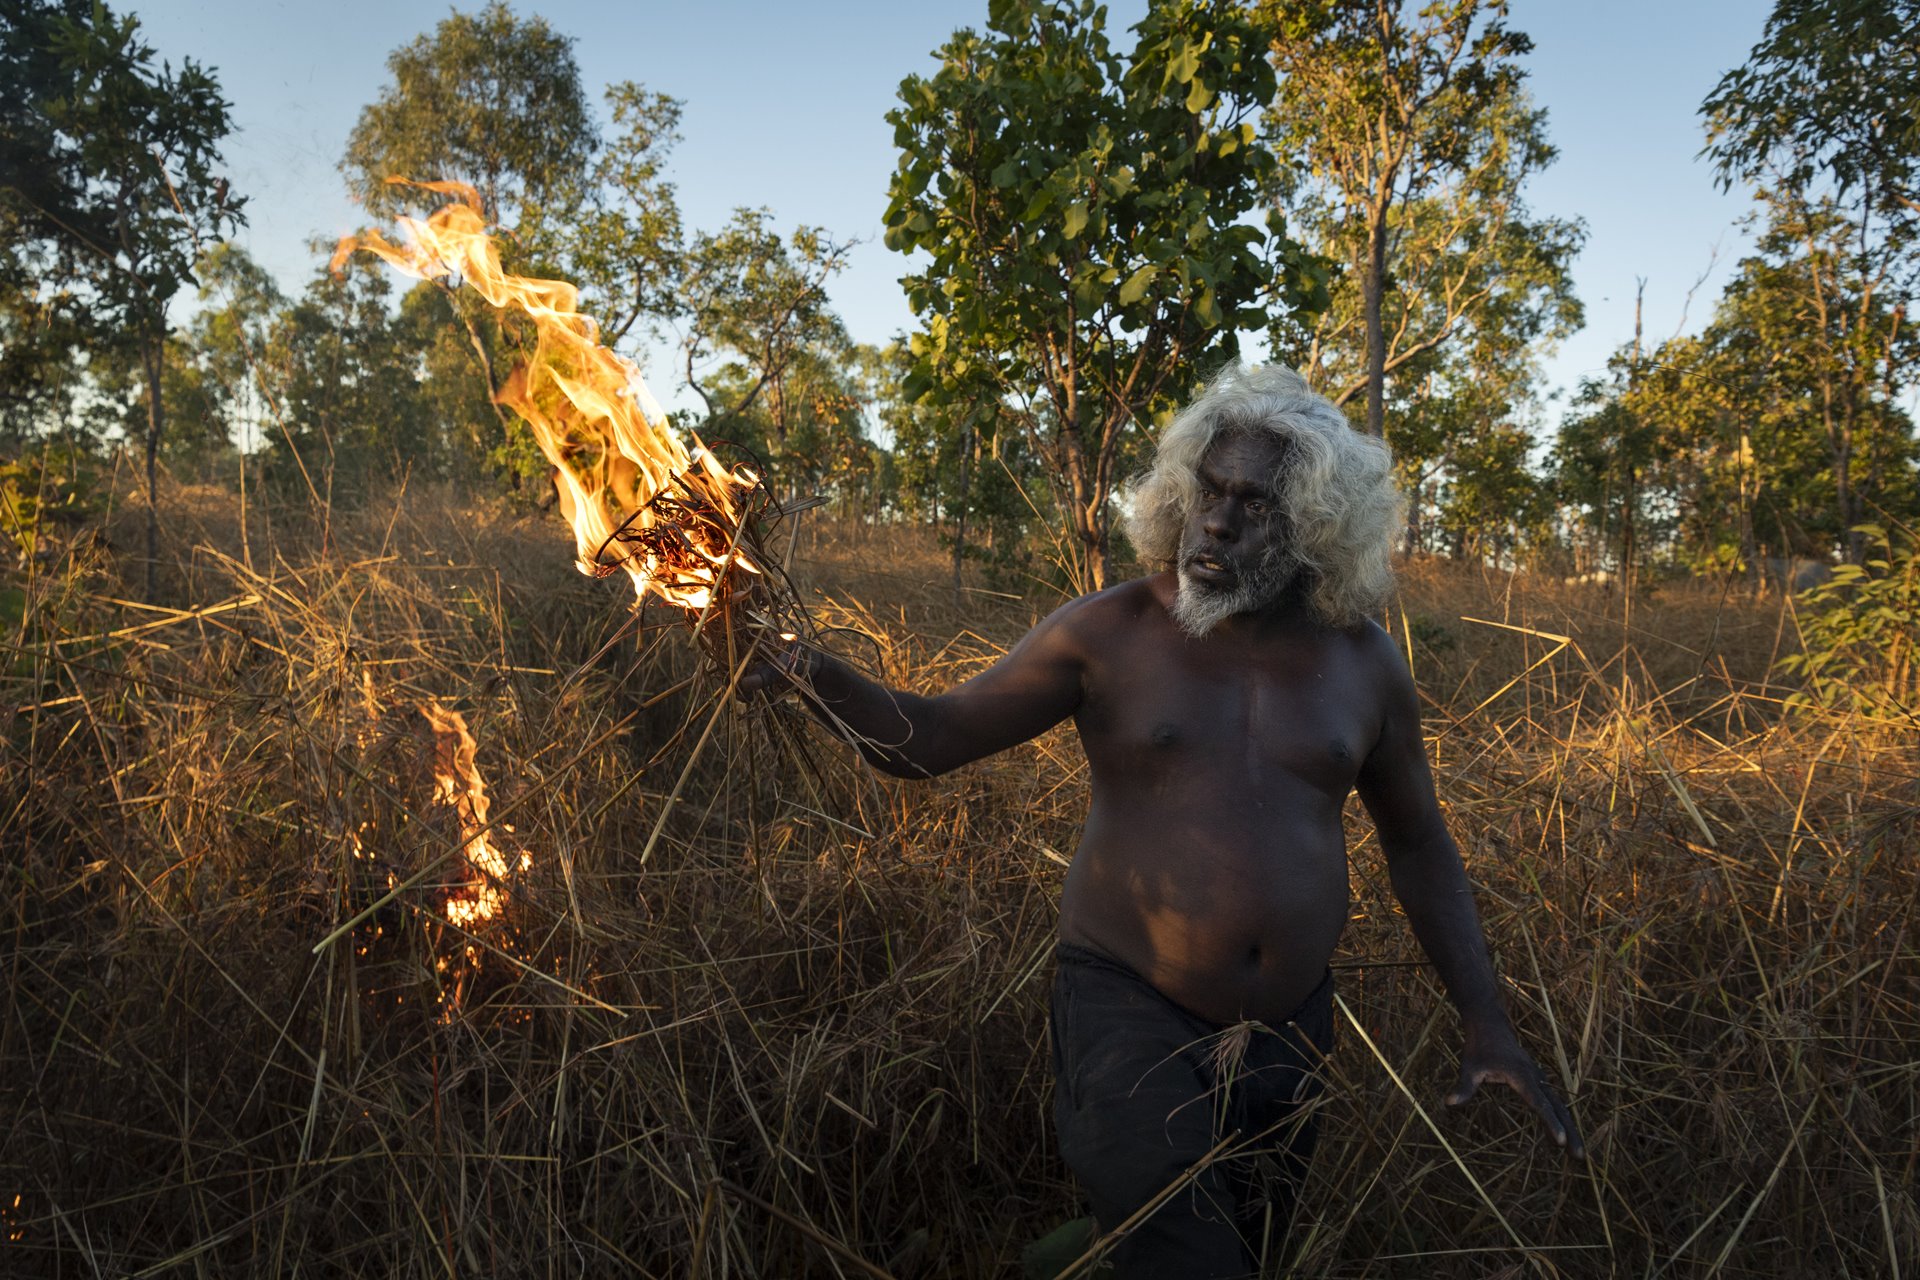 <p>Nawarddeken elder Conrad Maralngurra burns grass to protect the Mamadawerre community from late-season wildfires, in Mamadawerre, Arnhem Land, Australia. The late-evening fire will die out naturally once the temperature drops and moisture levels rise.</p>
